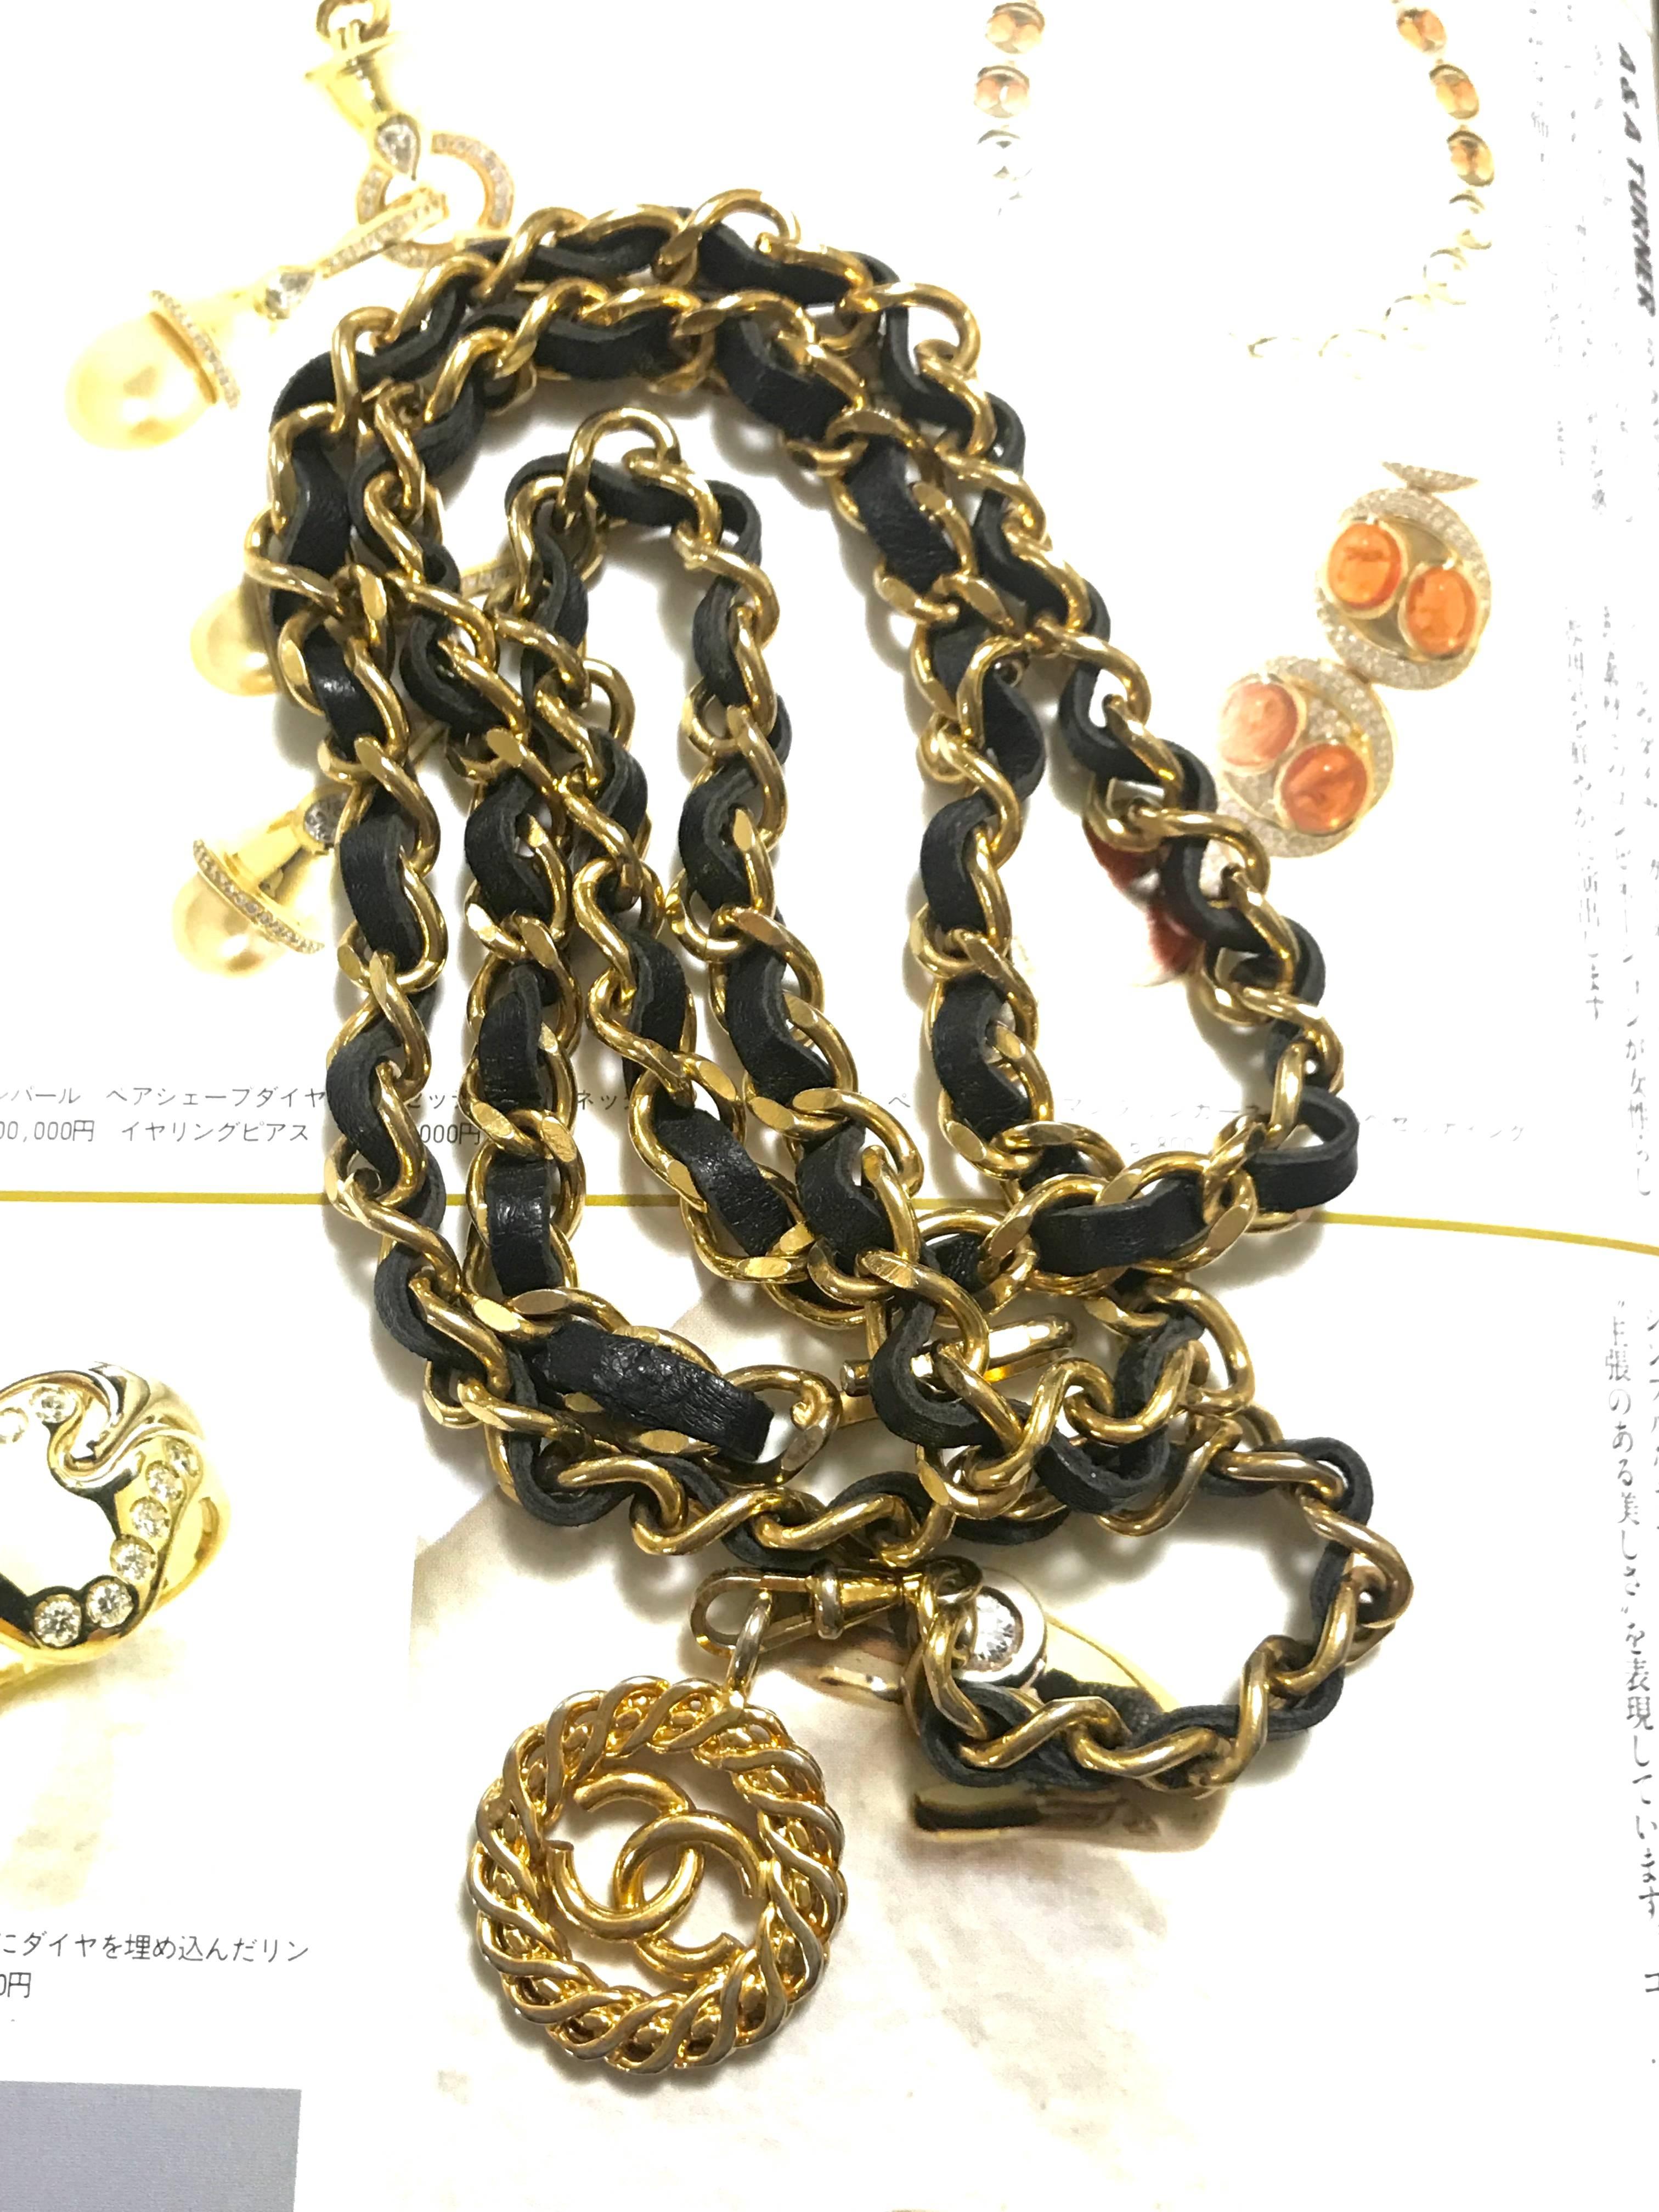 Women's Vintage CHANEL golden chain and black belt/necklace with flower CC mark charm. 